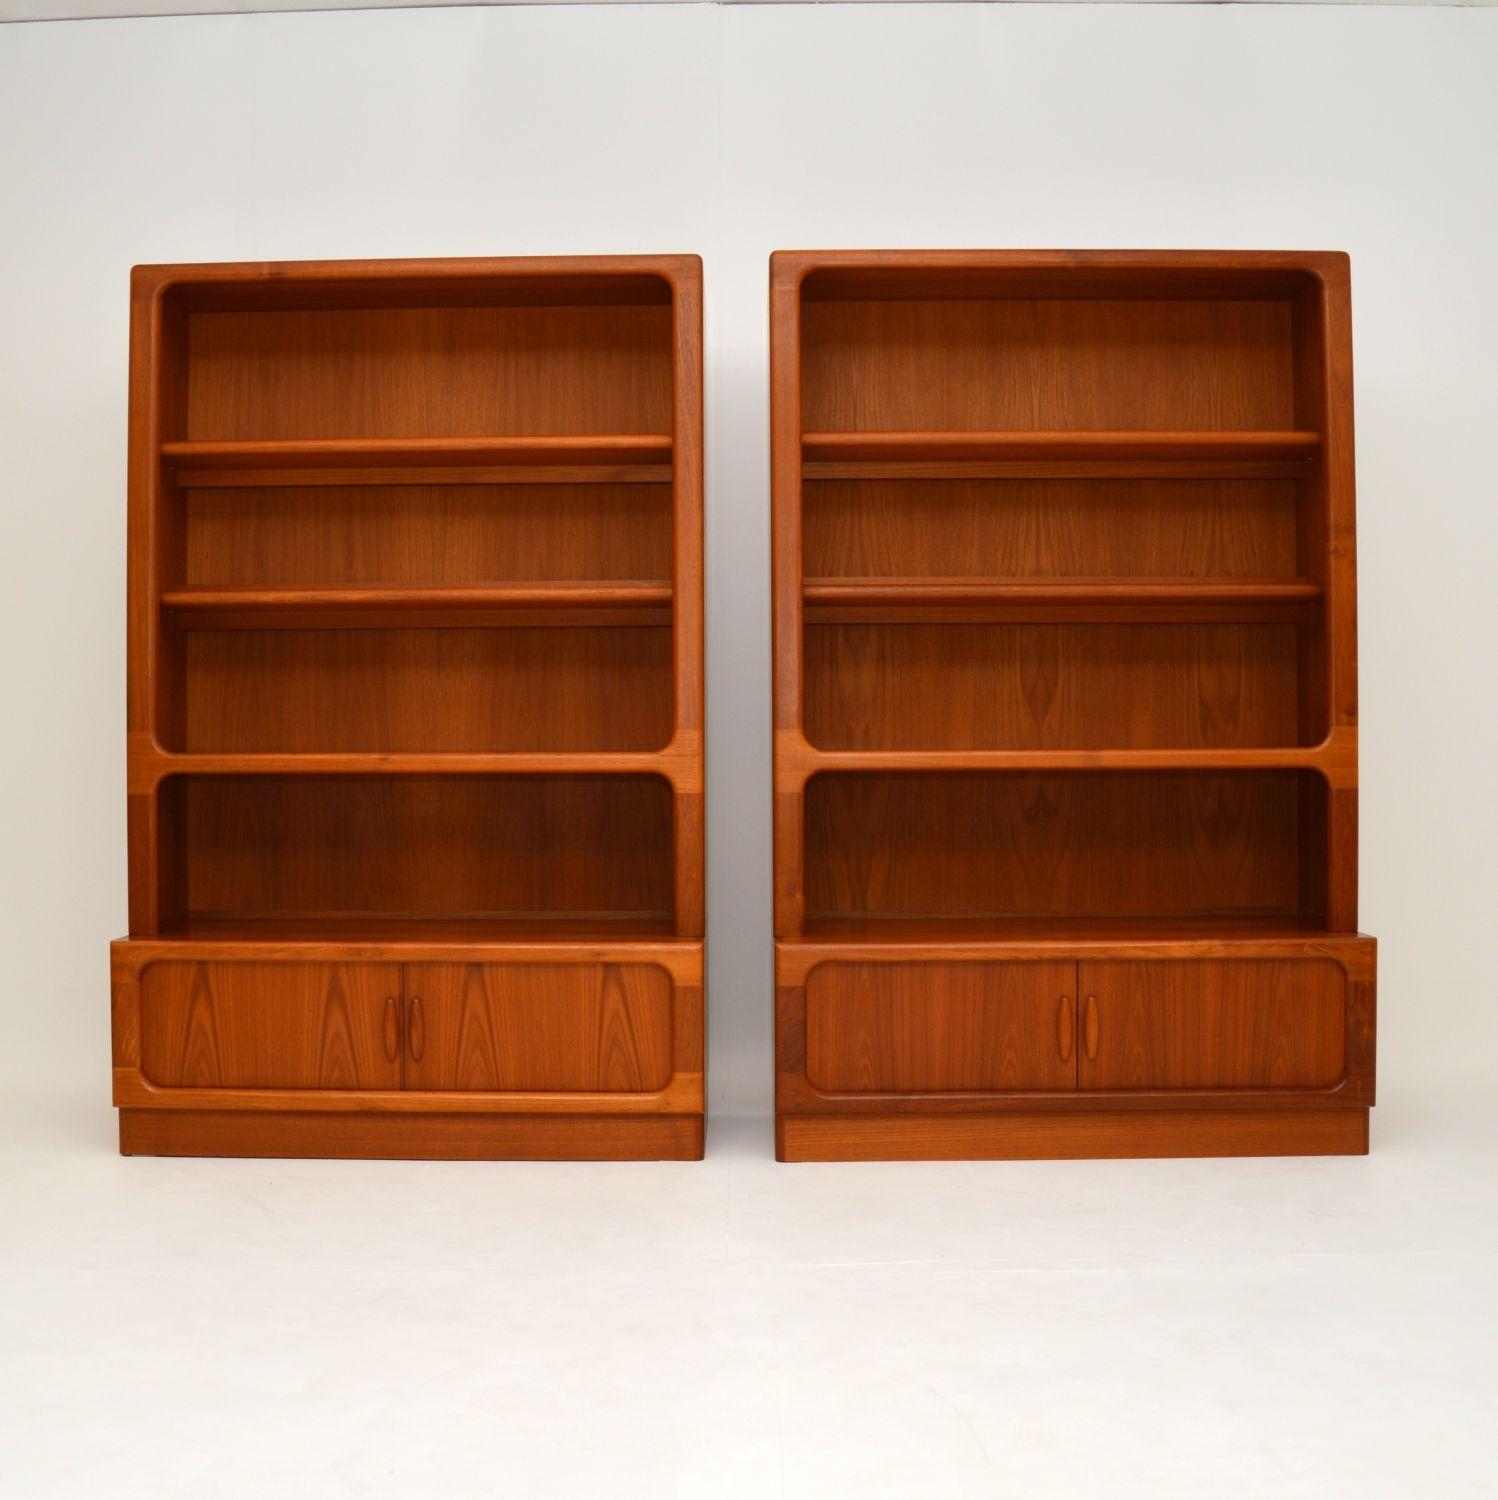 A stunning pair of large Danish bookcases in solid teak. These were made by Dyrlund, they date from the 1970-80’s.

The quality is absolutely amazing, these are so well made and are very useful. They have tambour doors in the lower sections, the